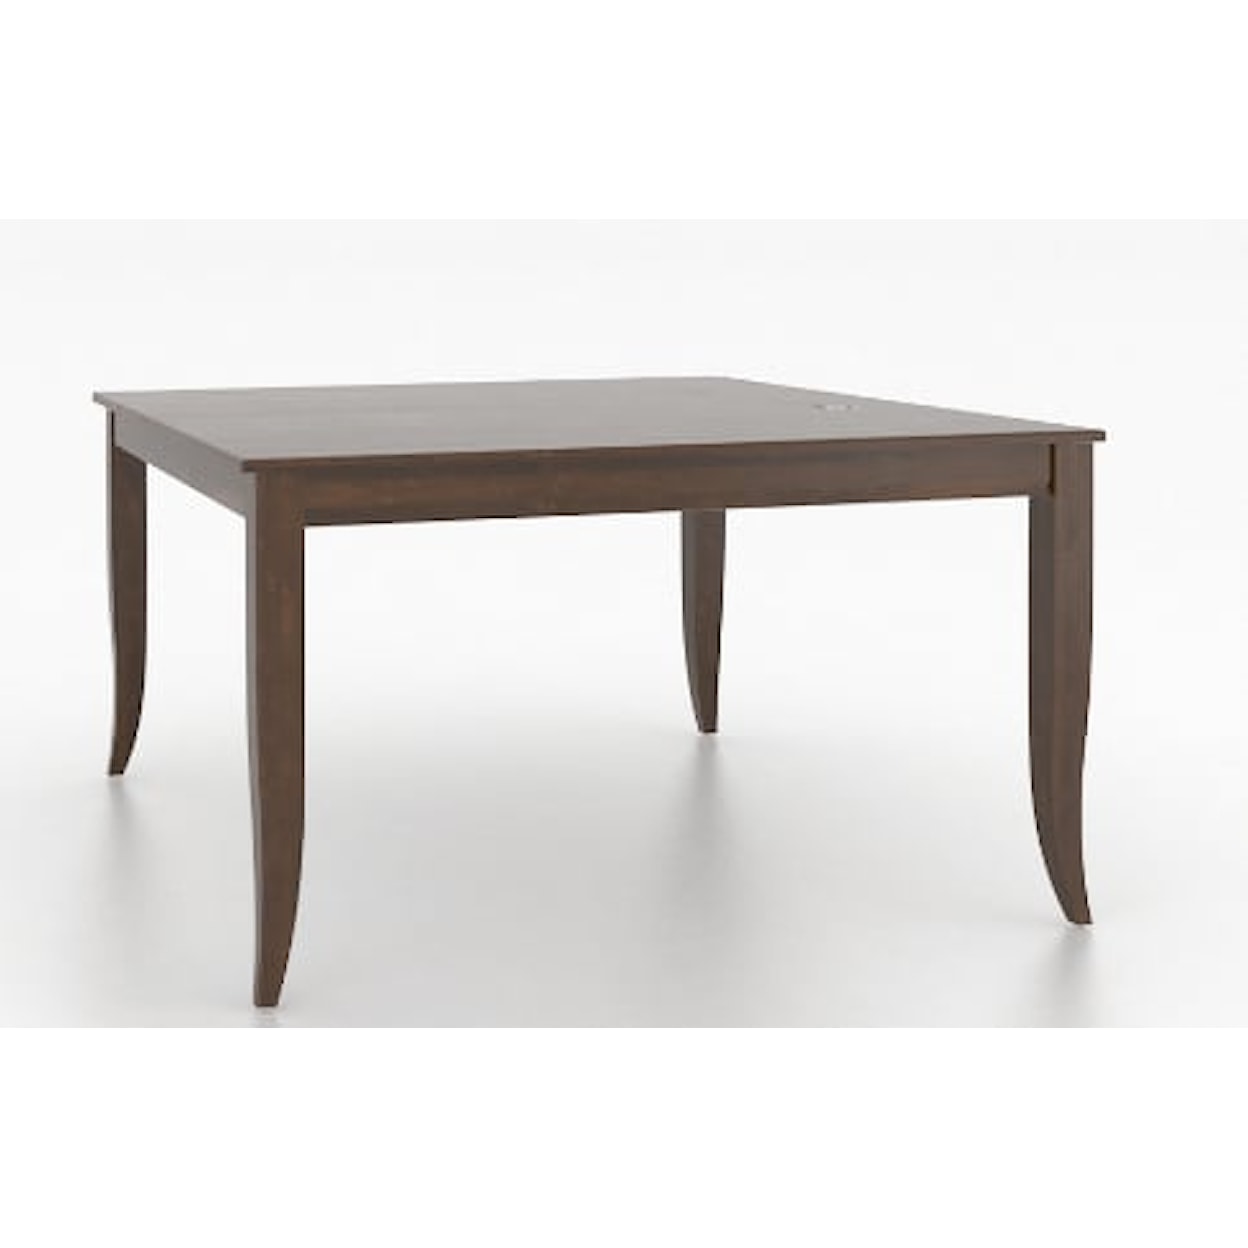 Canadel Canadel Square Wood Table